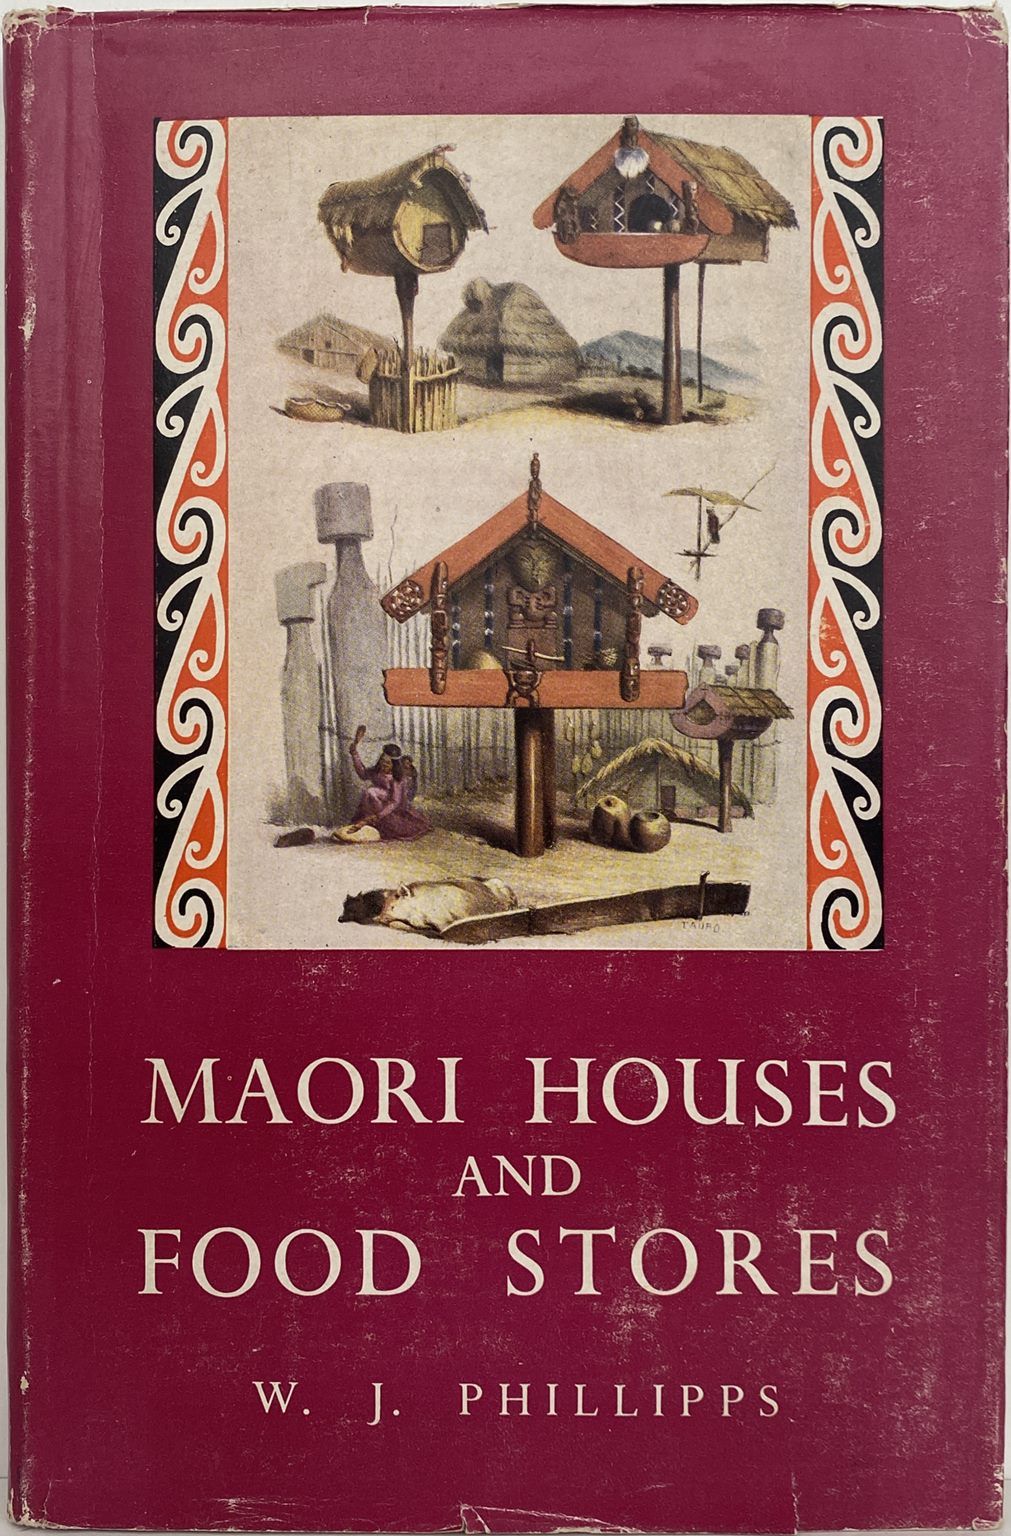 MAORI HOUSES AND FOOD STORES